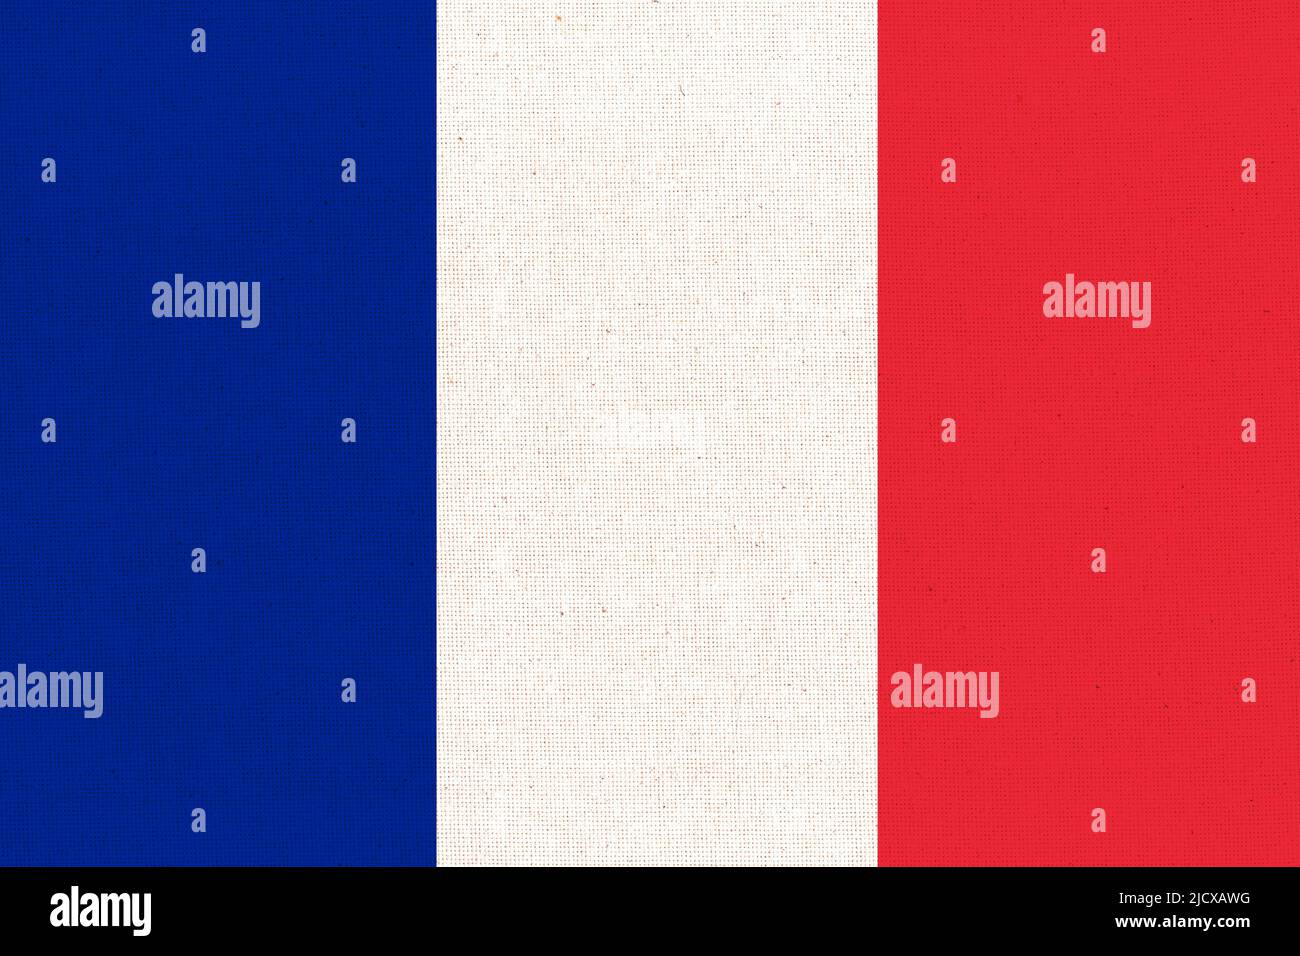 Flag of france. French flag on fabric surface. Fabric texture. National symbol of France on patterned background. French Republic Stock Photo